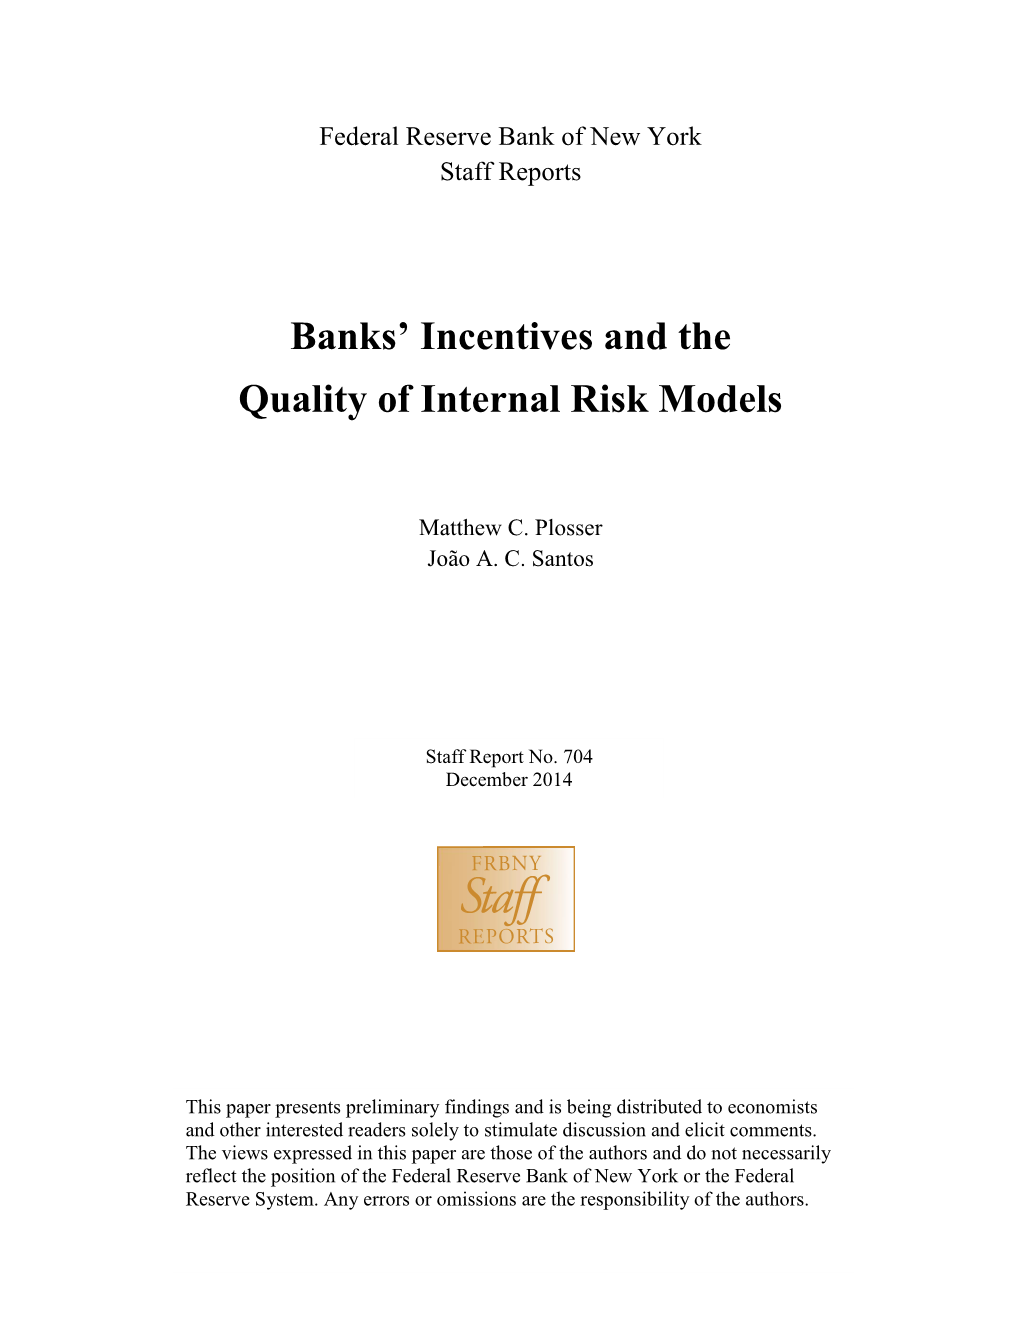 Banks' Incentives and the Quality of Internal Risk Models